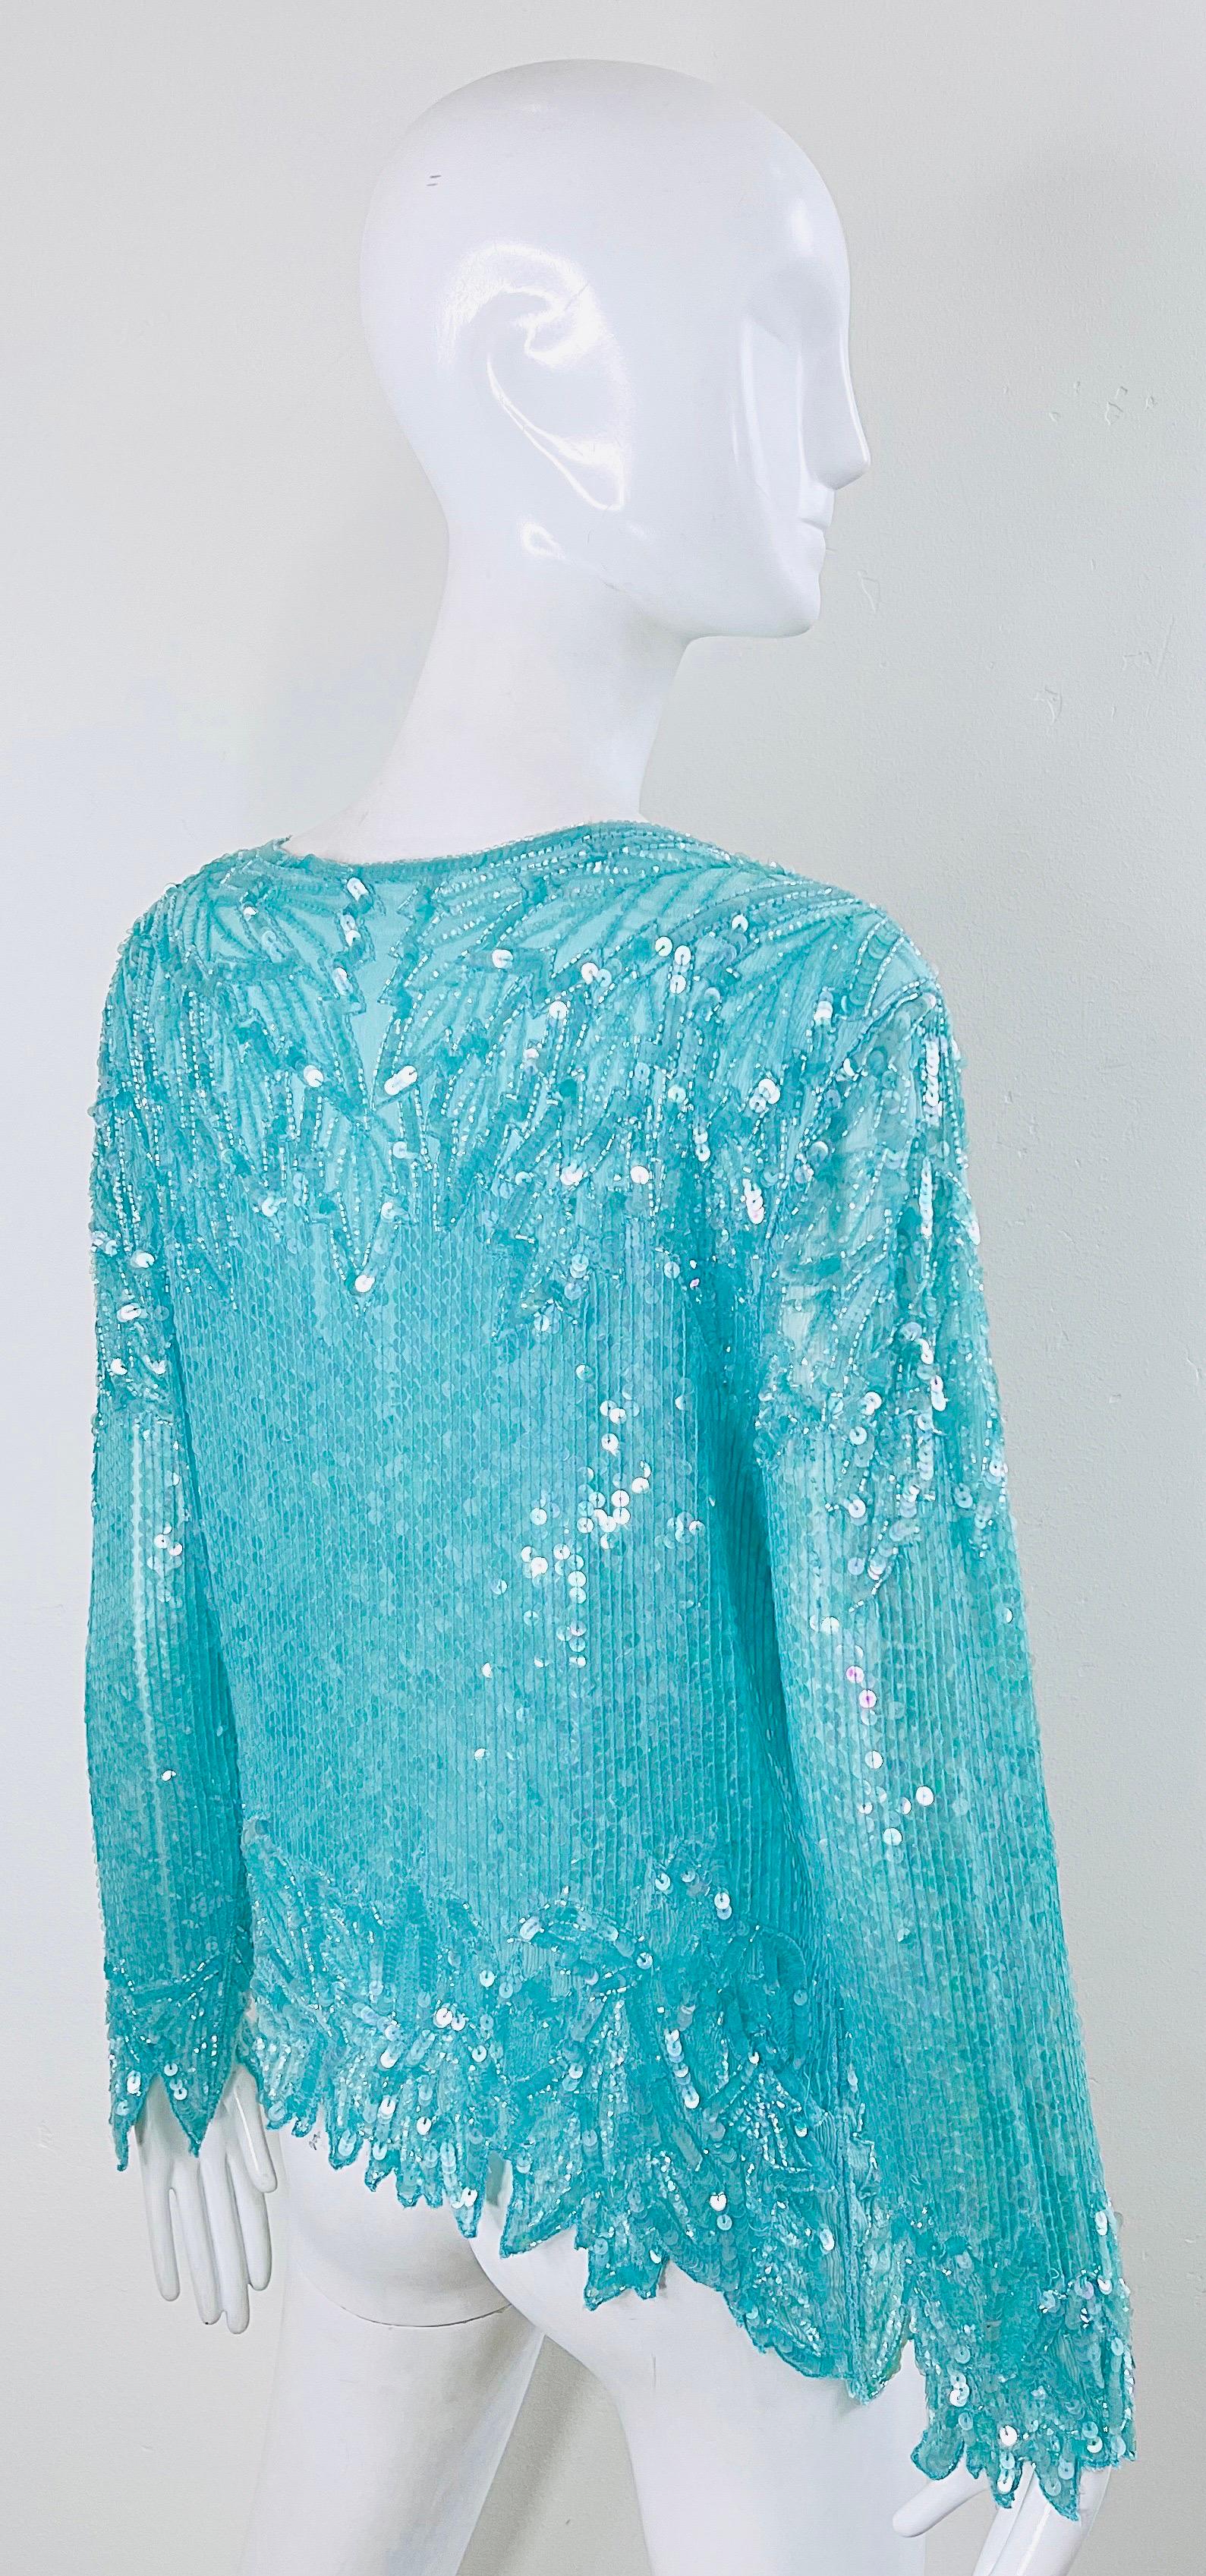 1980s Swee Lo Turquoise Blue Sequin Beaded Silk Chiffon Vintage 80s Blouse For Sale 6